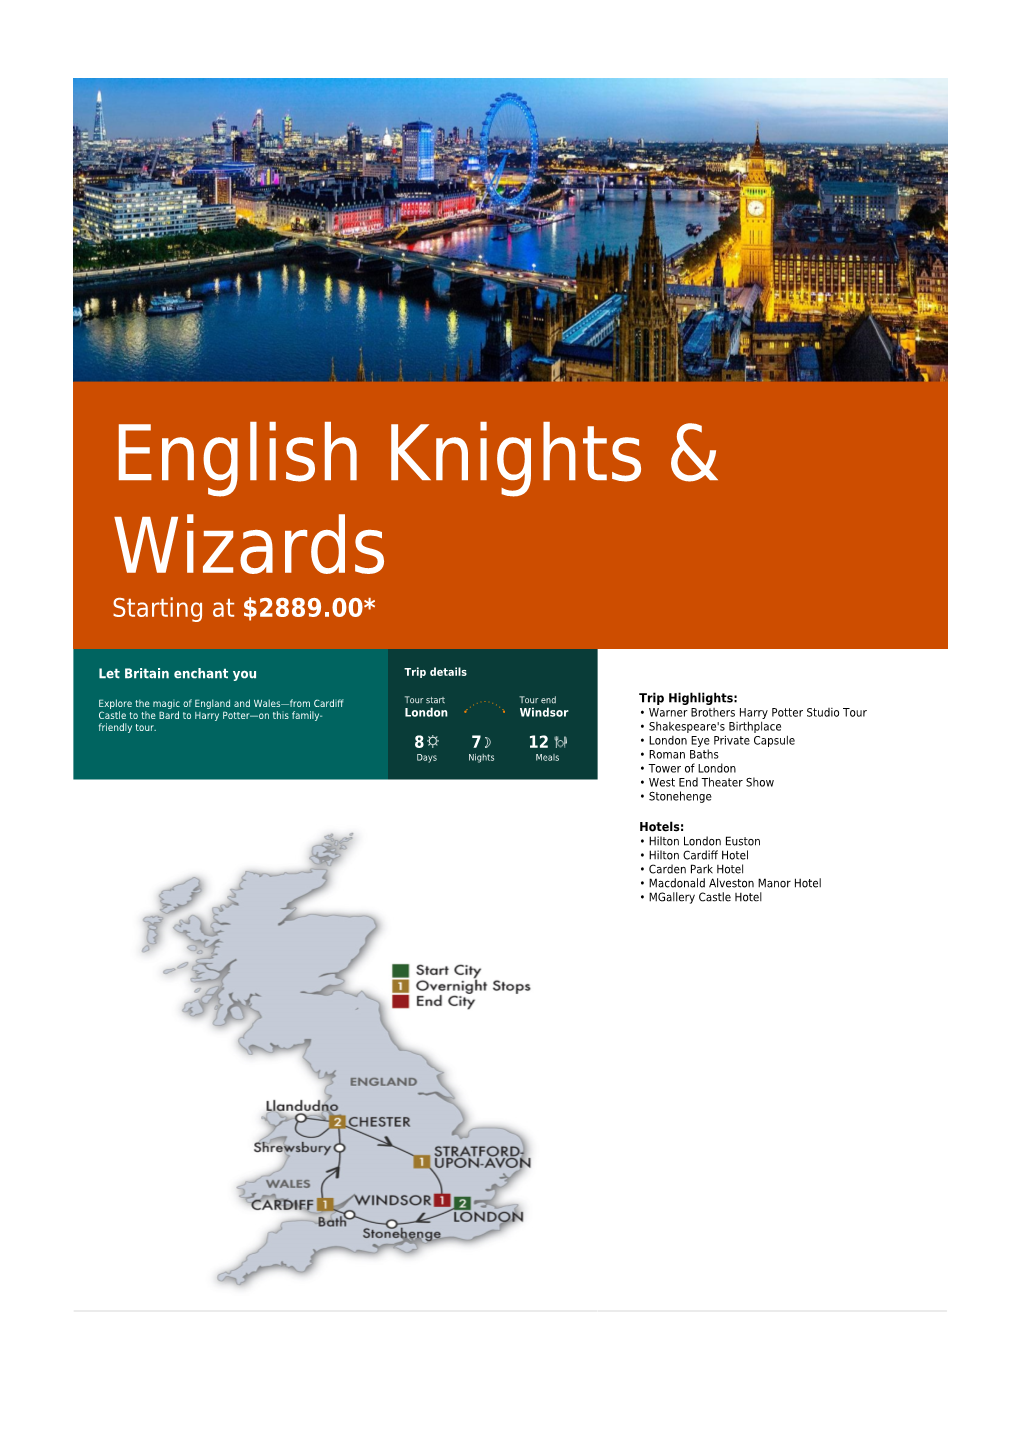 English Knights & Wizards